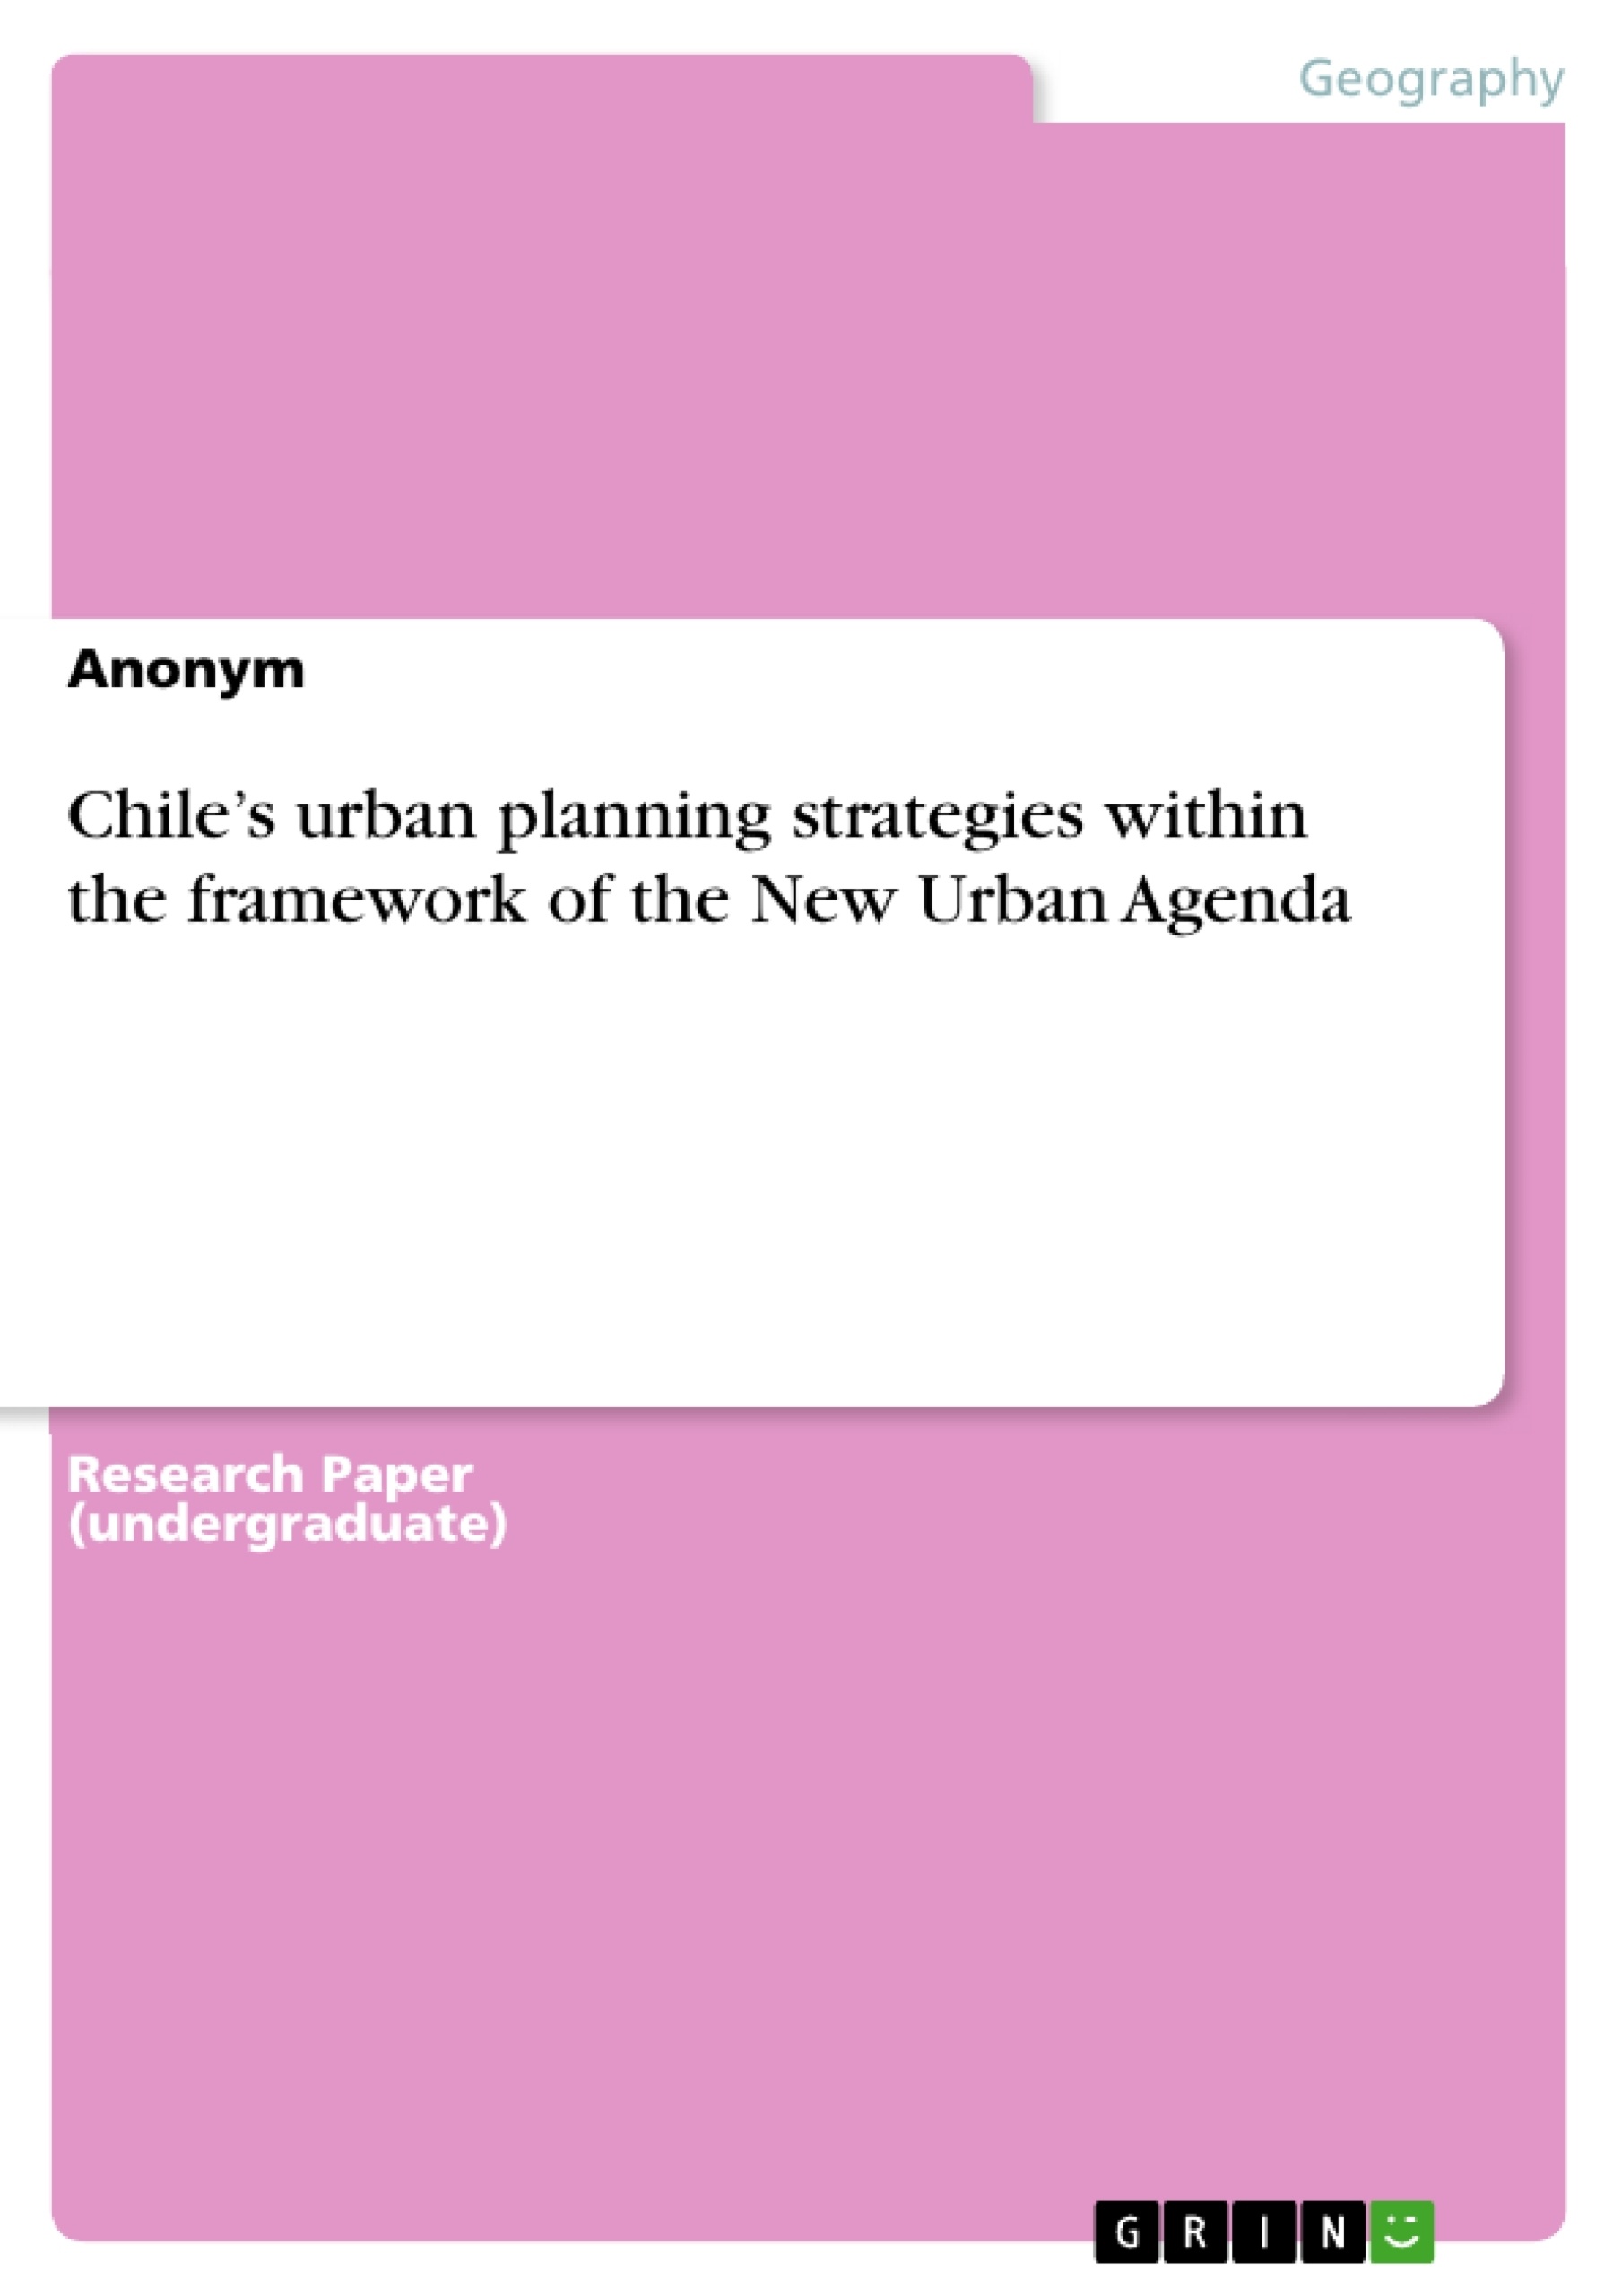 Titre: Chile’s urban planning strategies within the framework of the New Urban Agenda